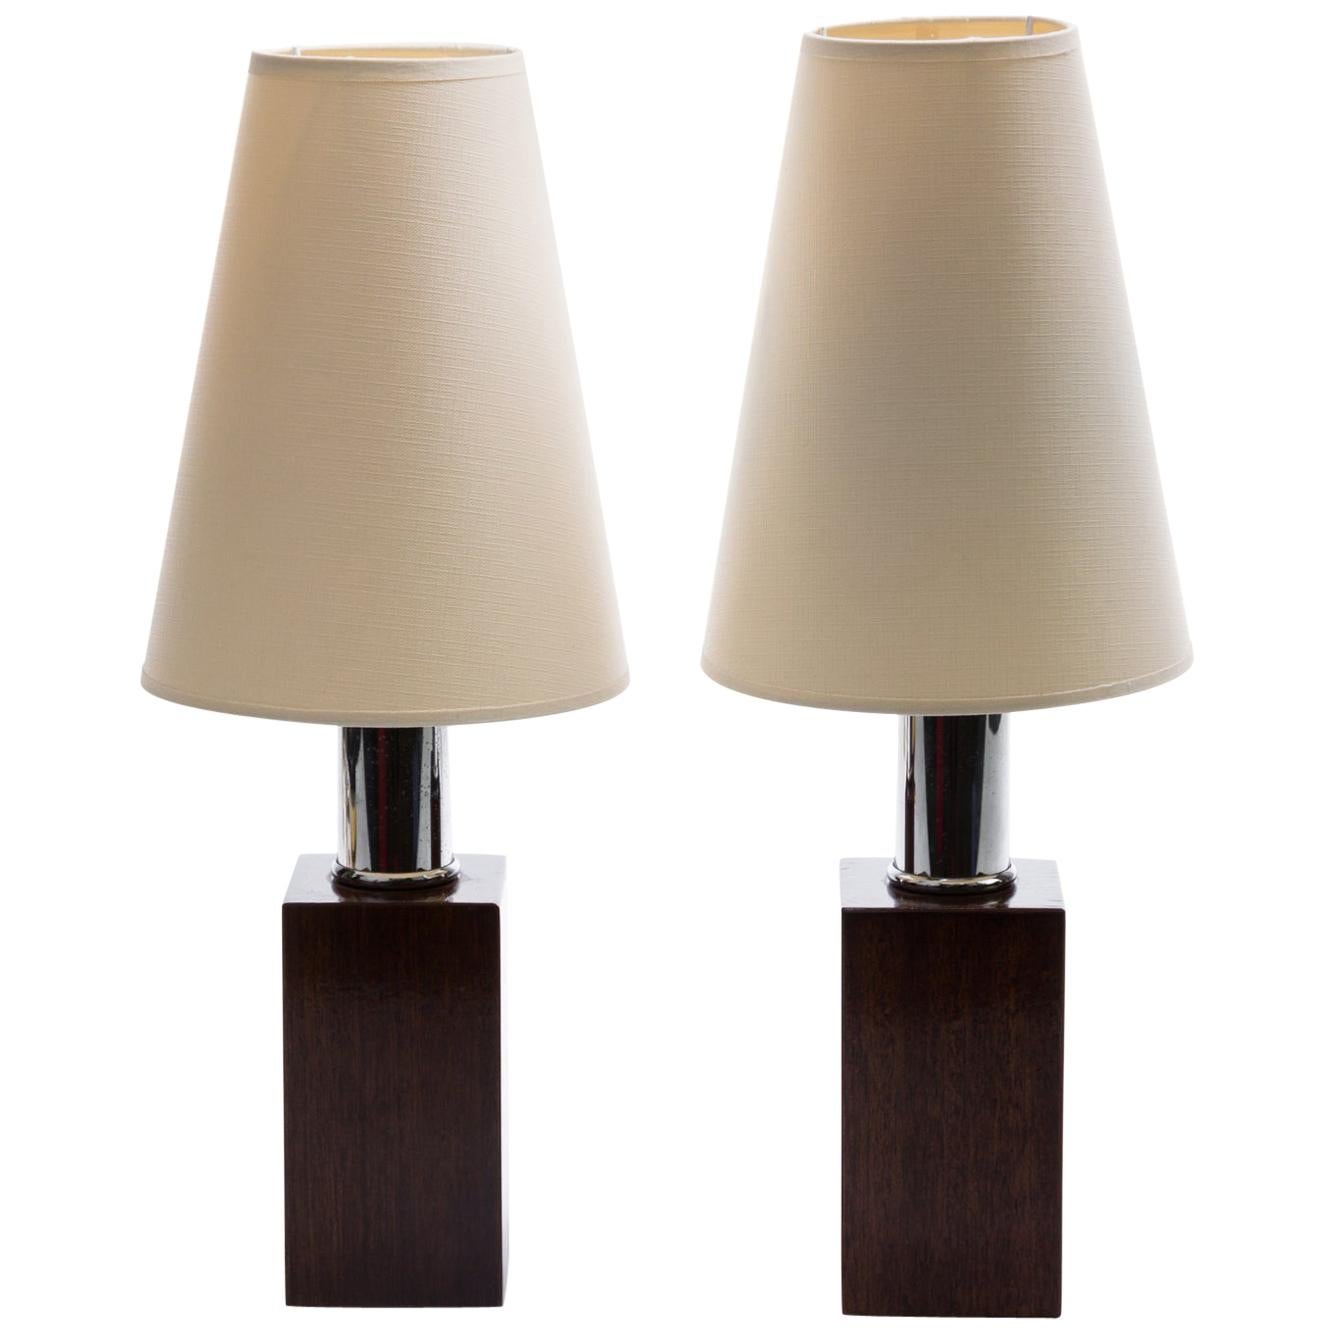 Pair of Art Deco Table Chrome Lamps, Wood, Veneered Bases For Sale